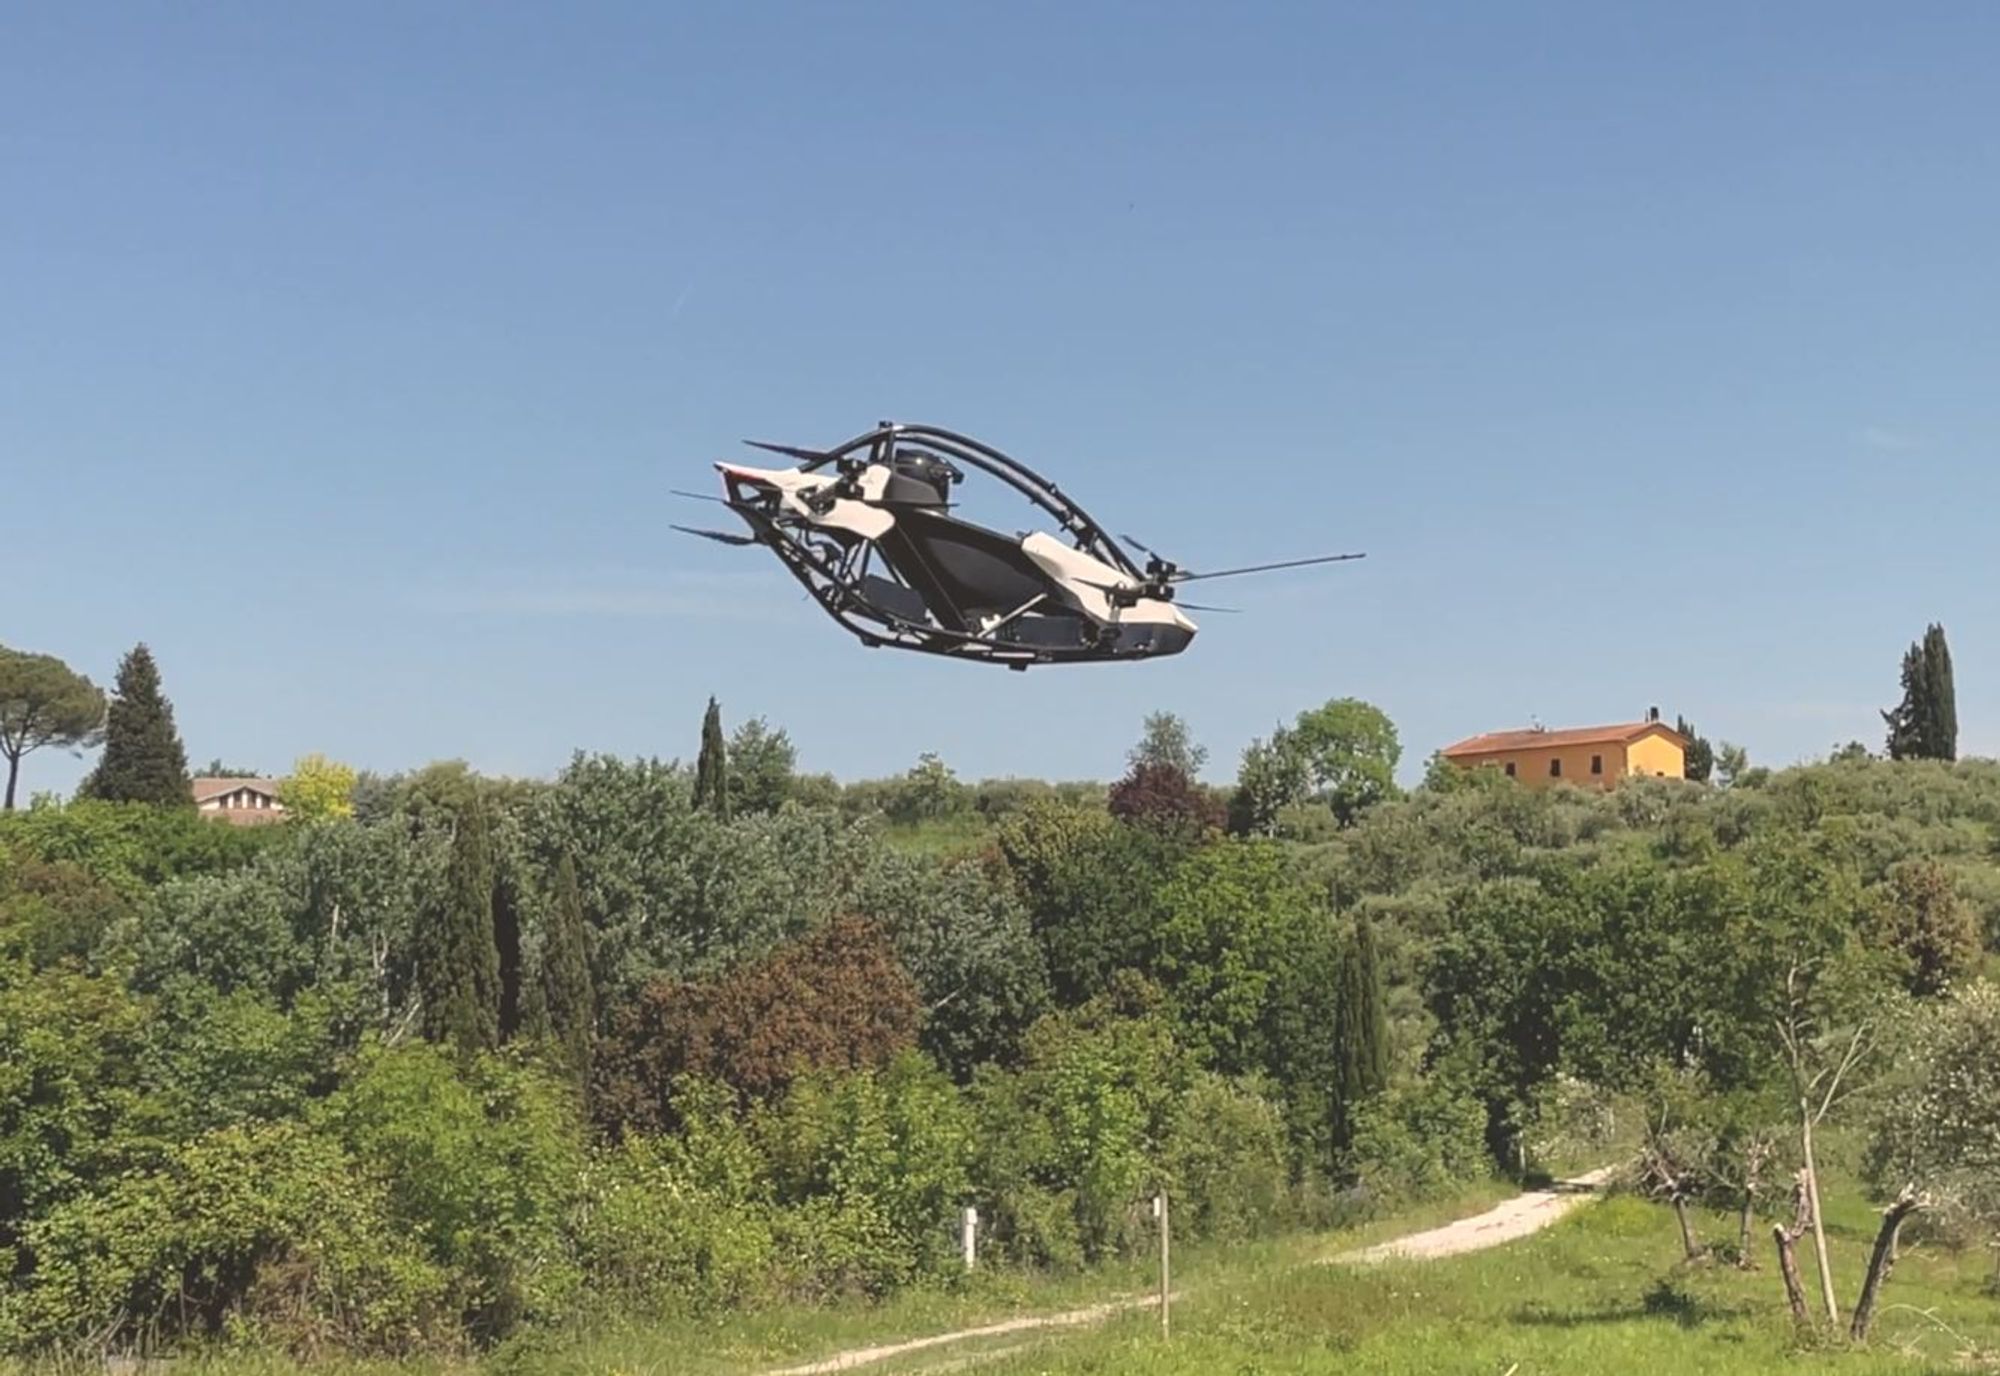 Flying car company boss completes "first ever" commute in $83K space-age vehicle